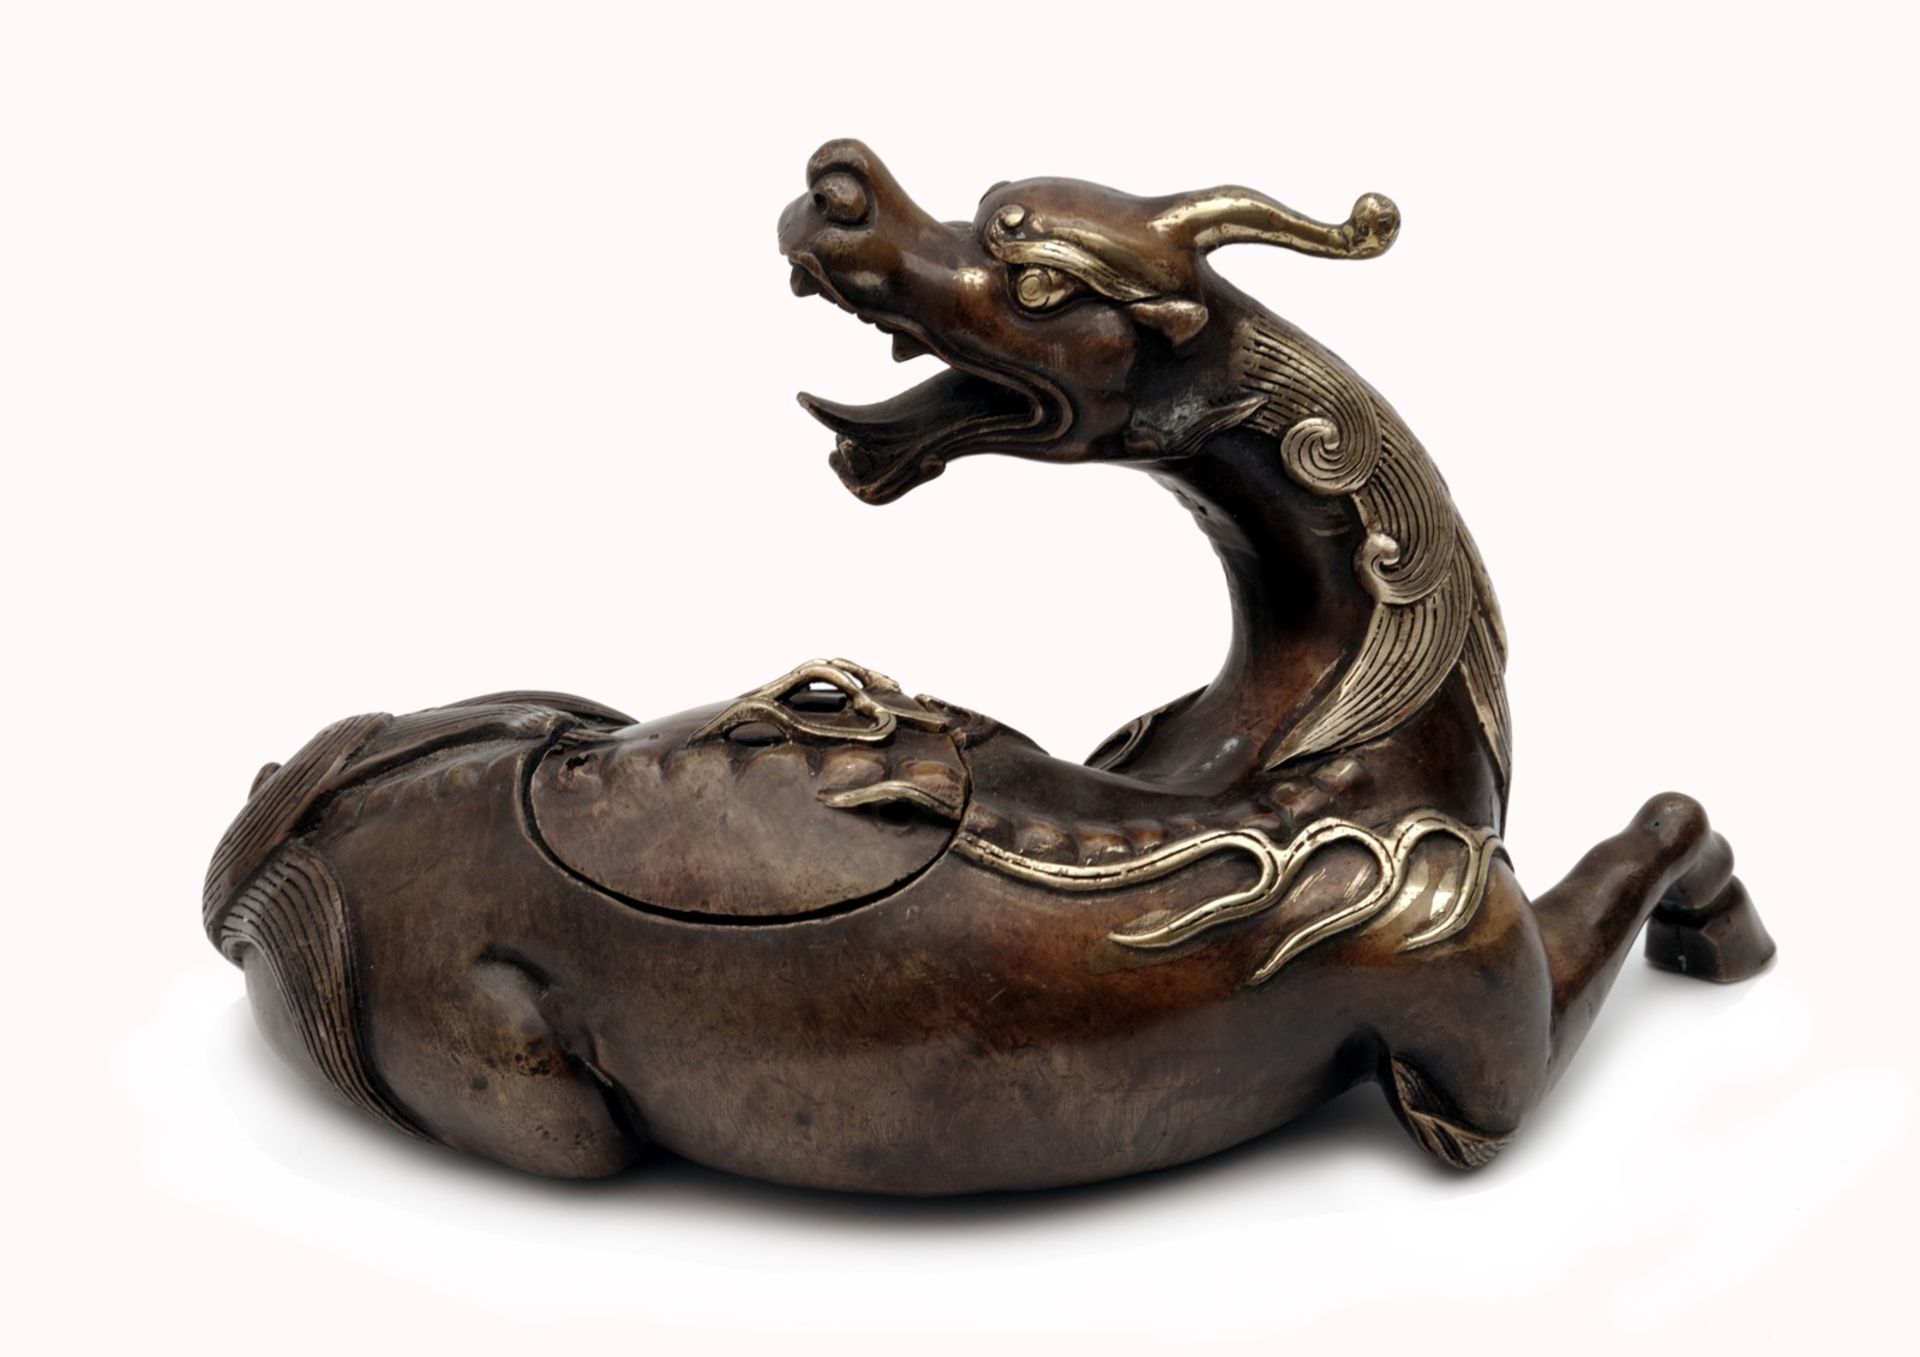 Incense Burner in the Form of a Qilin - Image 2 of 4